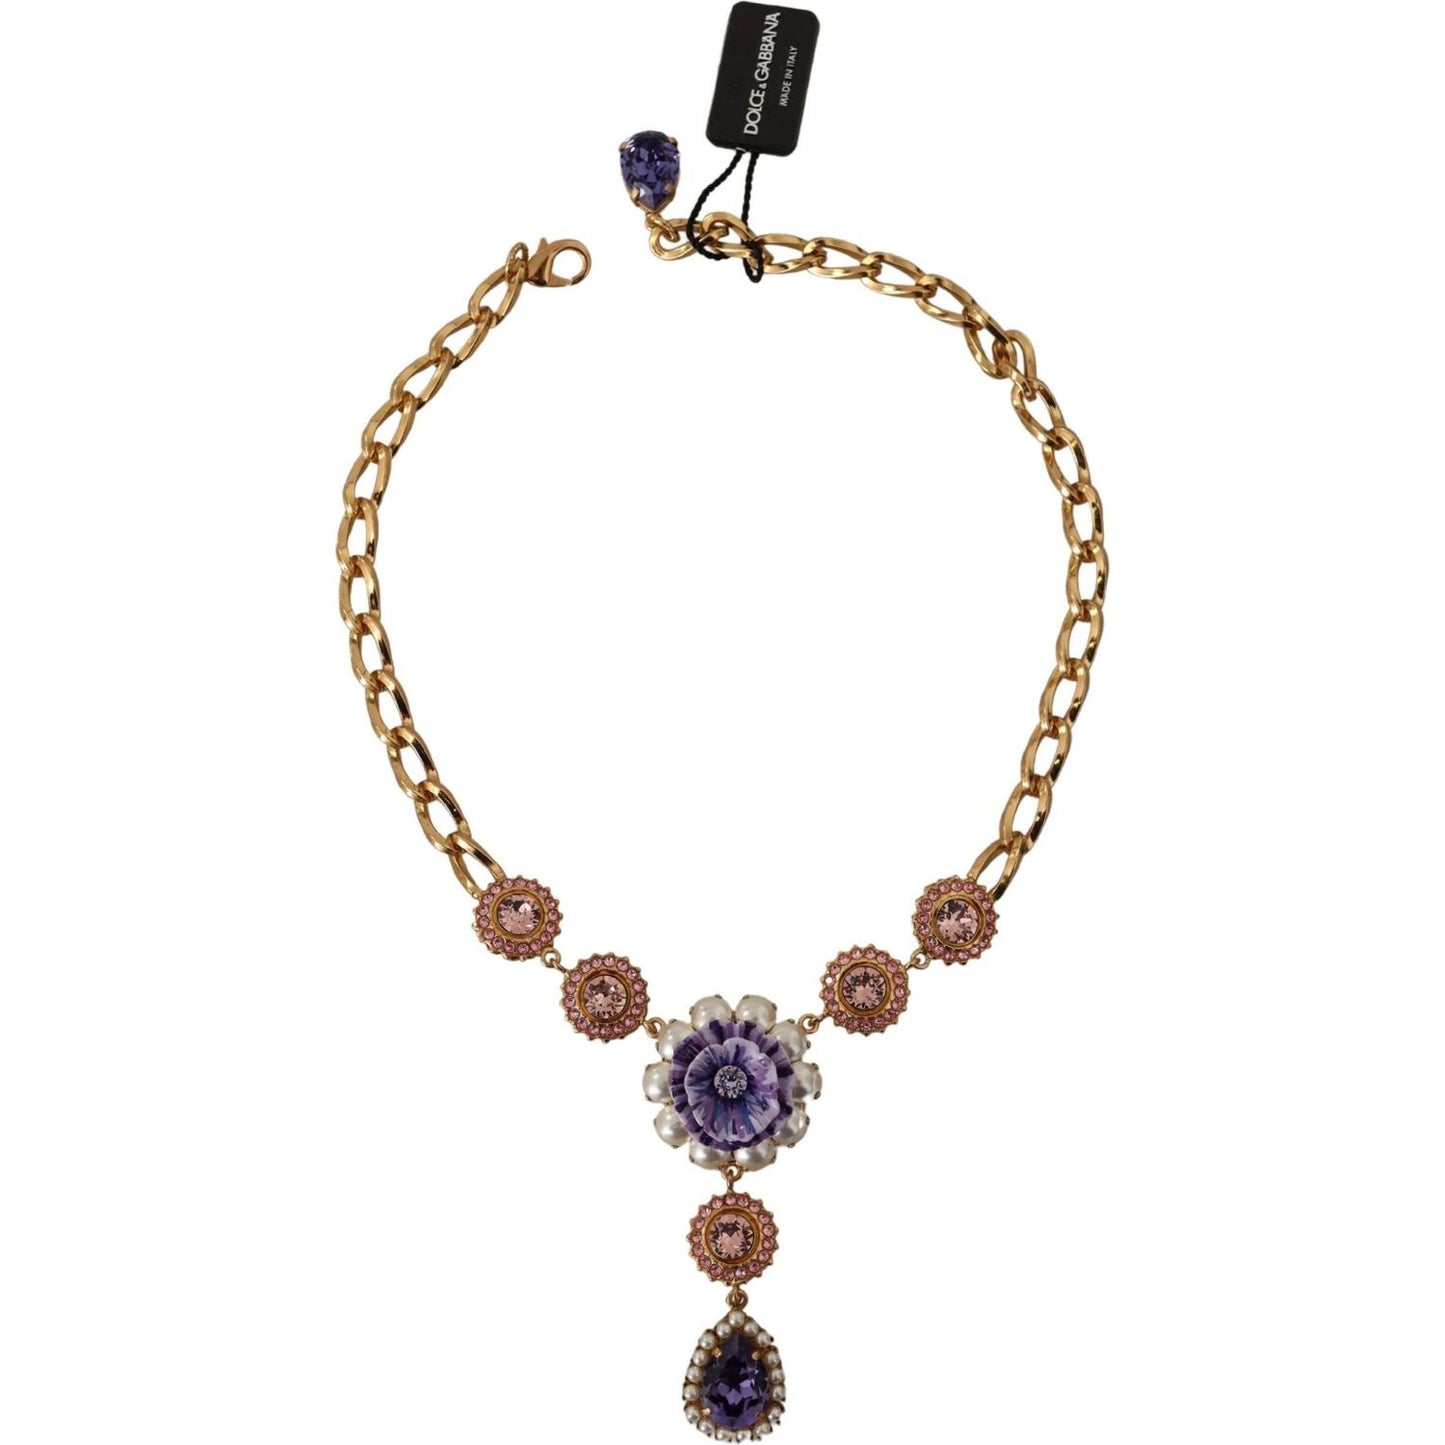 Dolce & Gabbana Elegant Floral Crystal Statement Necklace WOMAN NECKLACE gold-brass-crystal-purple-pink-pearl-pendants-necklace